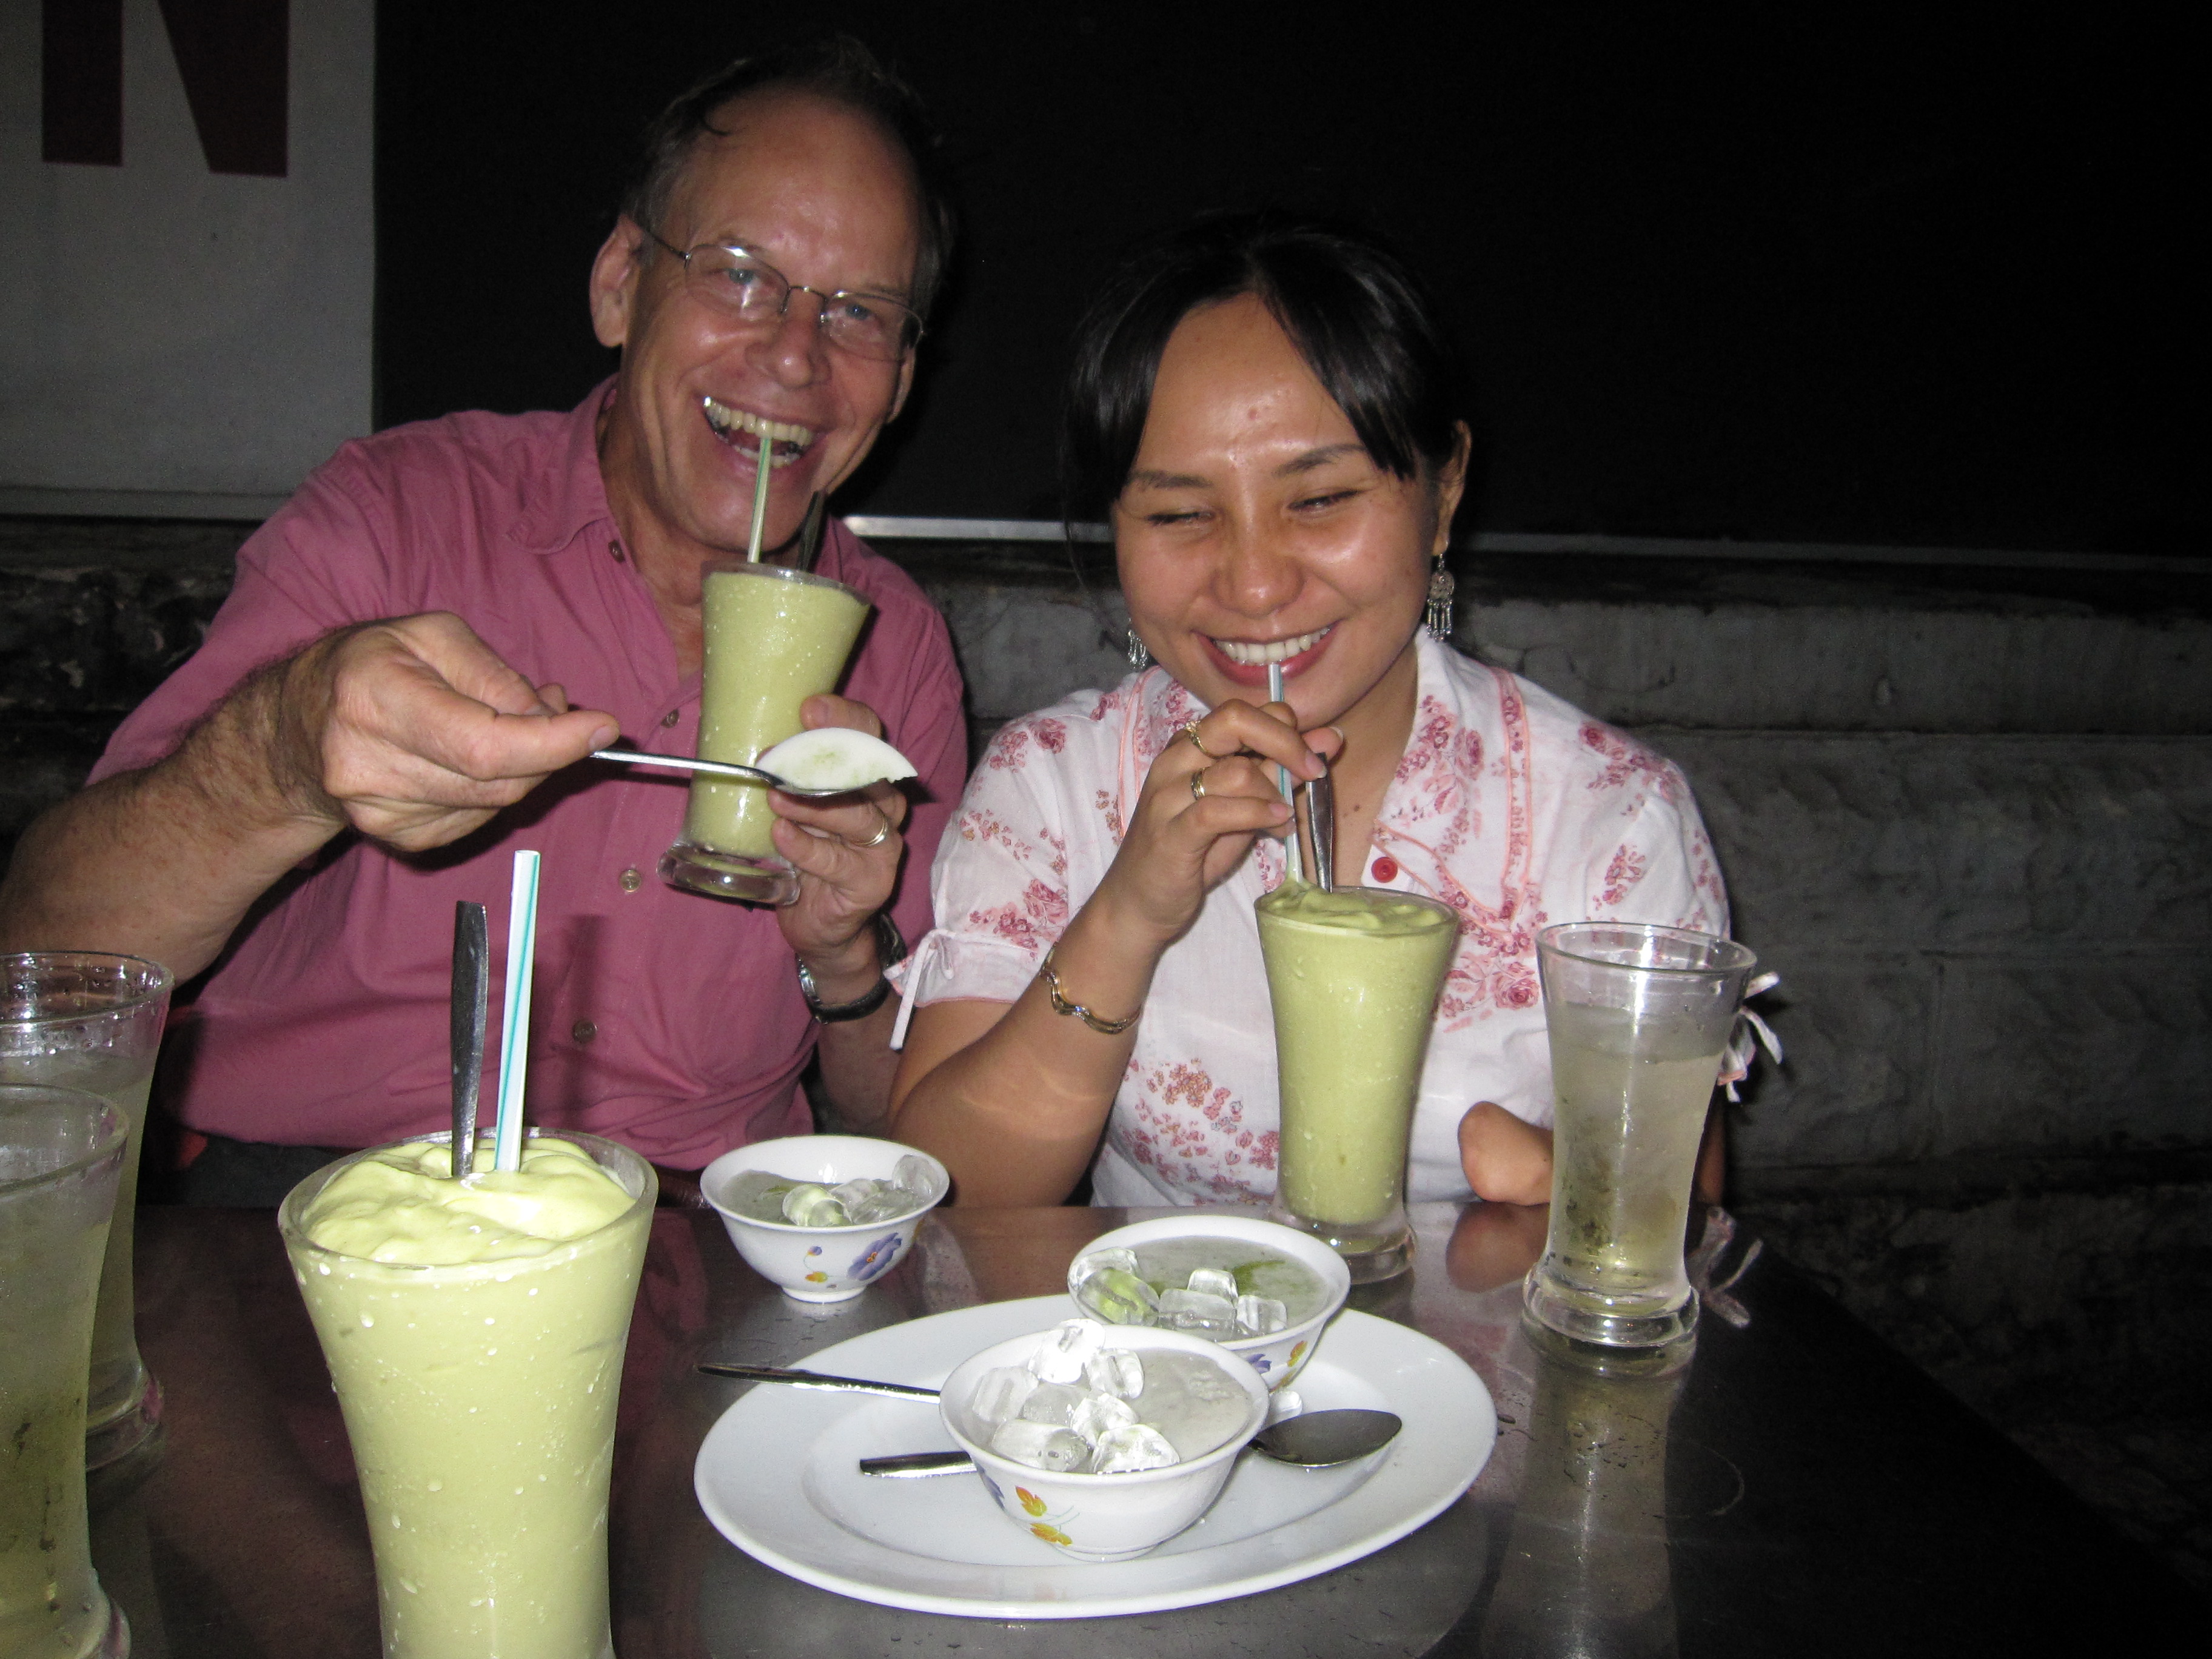 Tuyet and Lee dig into desert - durian/avocado smoothie!